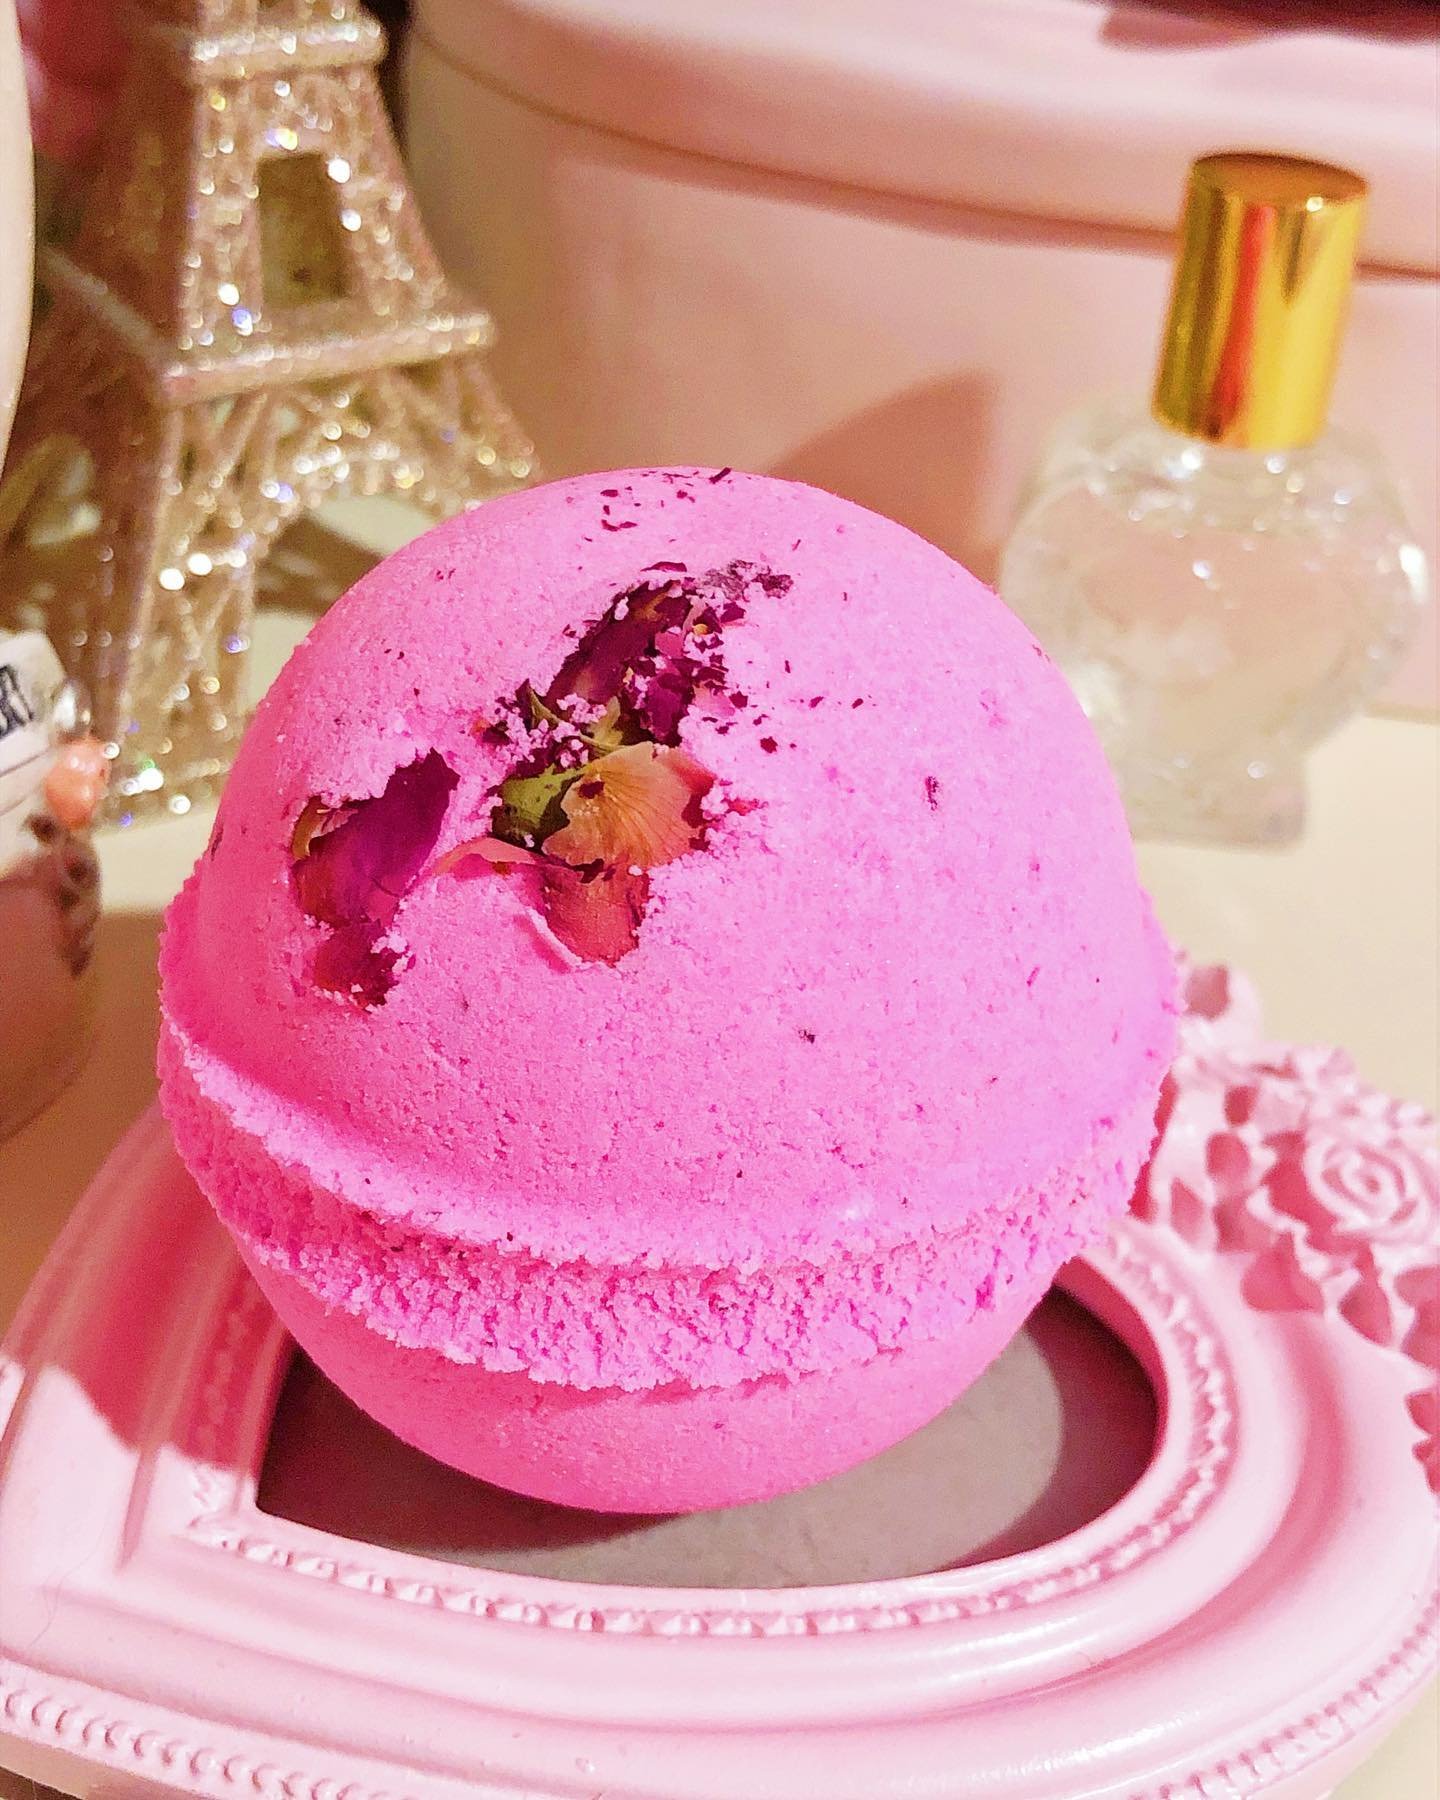 Making Venus Bath Bombs right now! The perfect PINK bath bomb with rosebuds and the sweet smell of cookies, berries and candy!! 

🎀ᡣ𐭩 🎀ᡣ𐭩 🎀ᡣ𐭩 🎀ᡣ𐭩 🎀ᡣ𐭩 🎀ᡣ𐭩

20% off in my beauty shop with code: girlythings 
Ends soon!!
.
#margaritabloom #ve